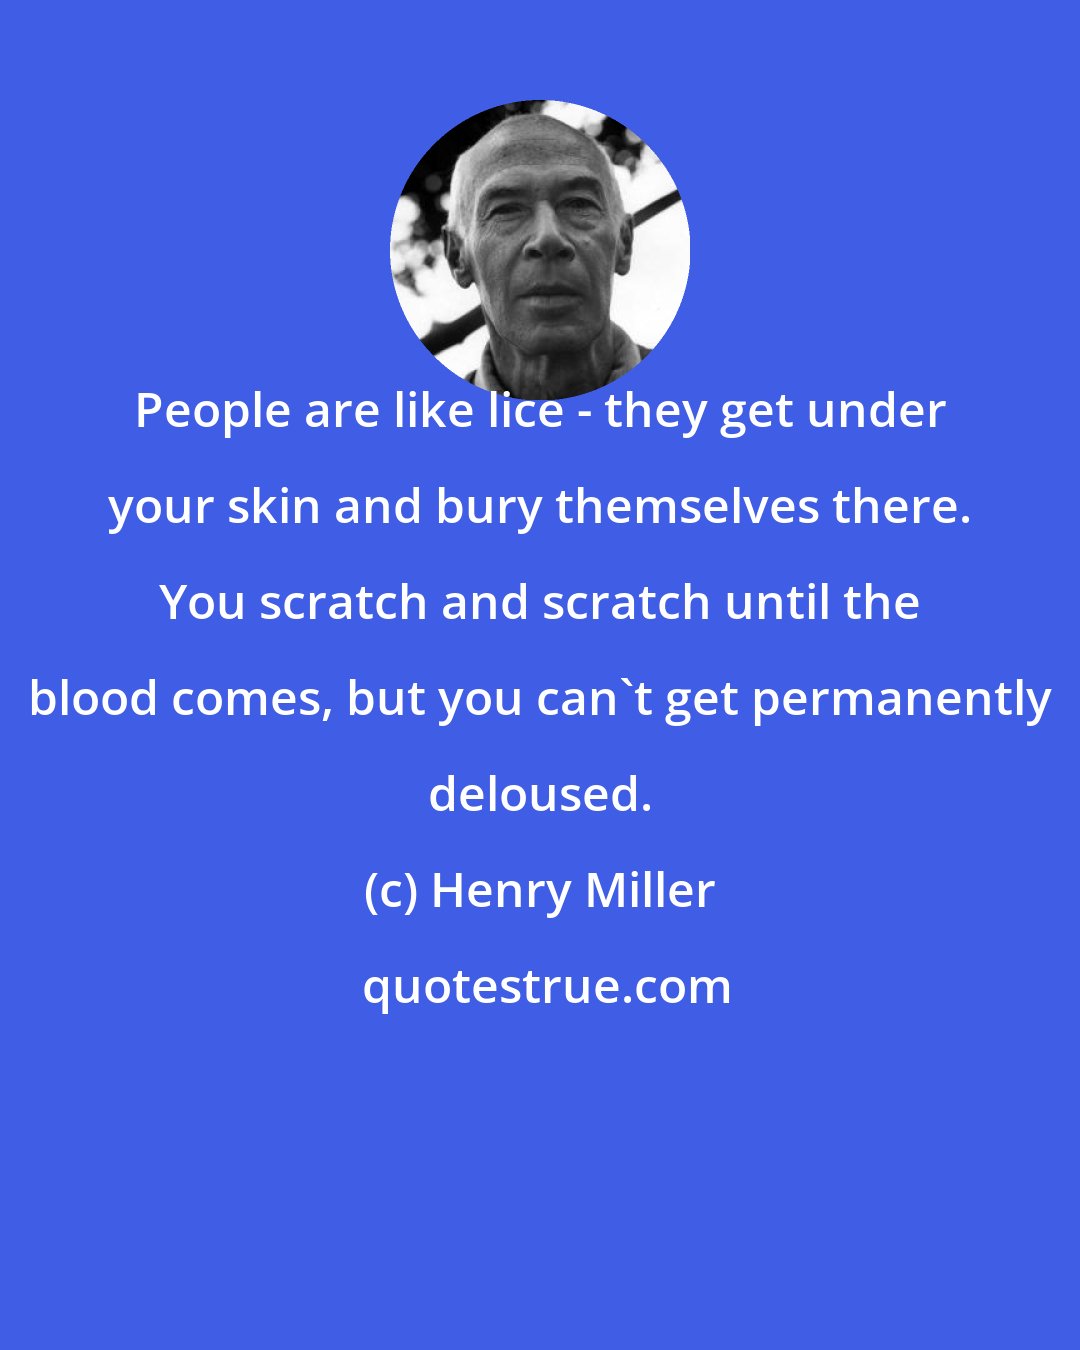 Henry Miller: People are like lice - they get under your skin and bury themselves there. You scratch and scratch until the blood comes, but you can't get permanently deloused.